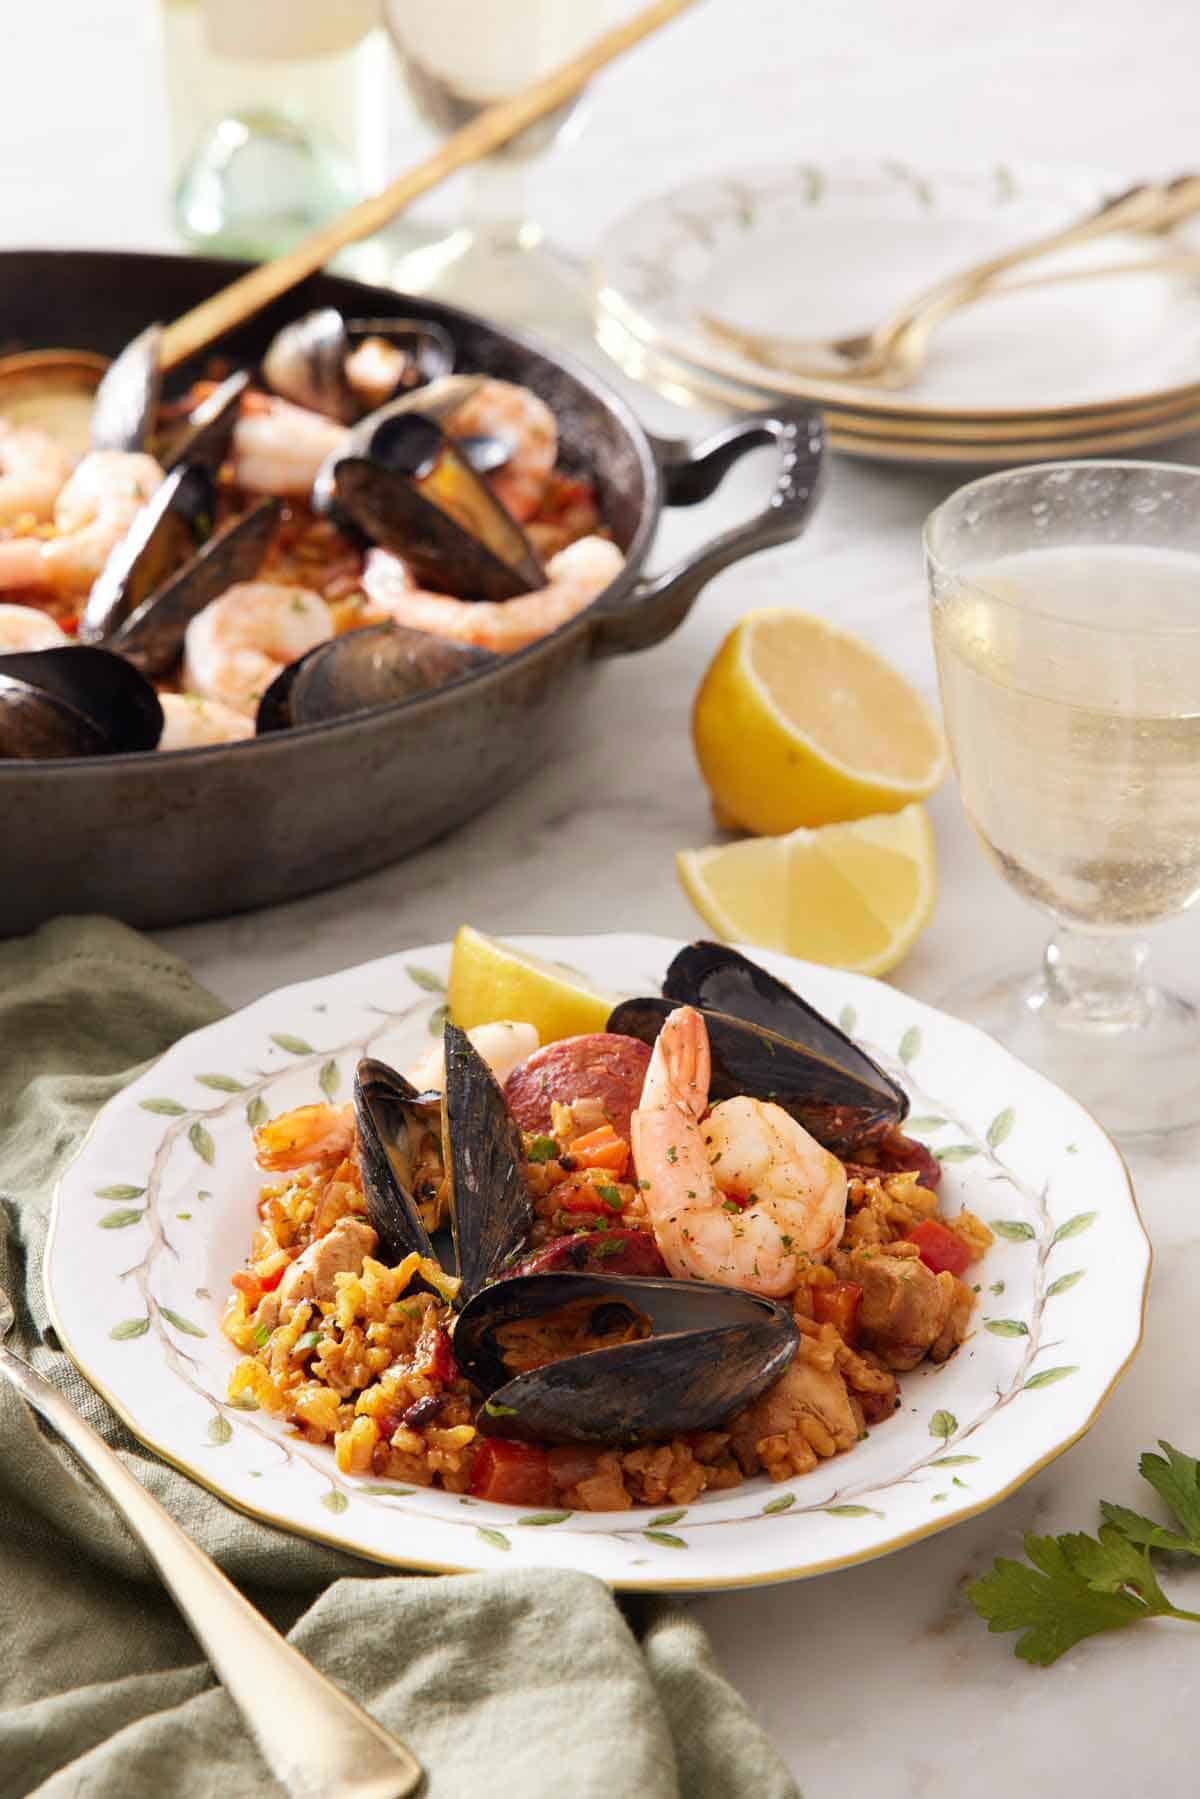 A plate of paella with a glass of wine and skillet of more paella in the background.